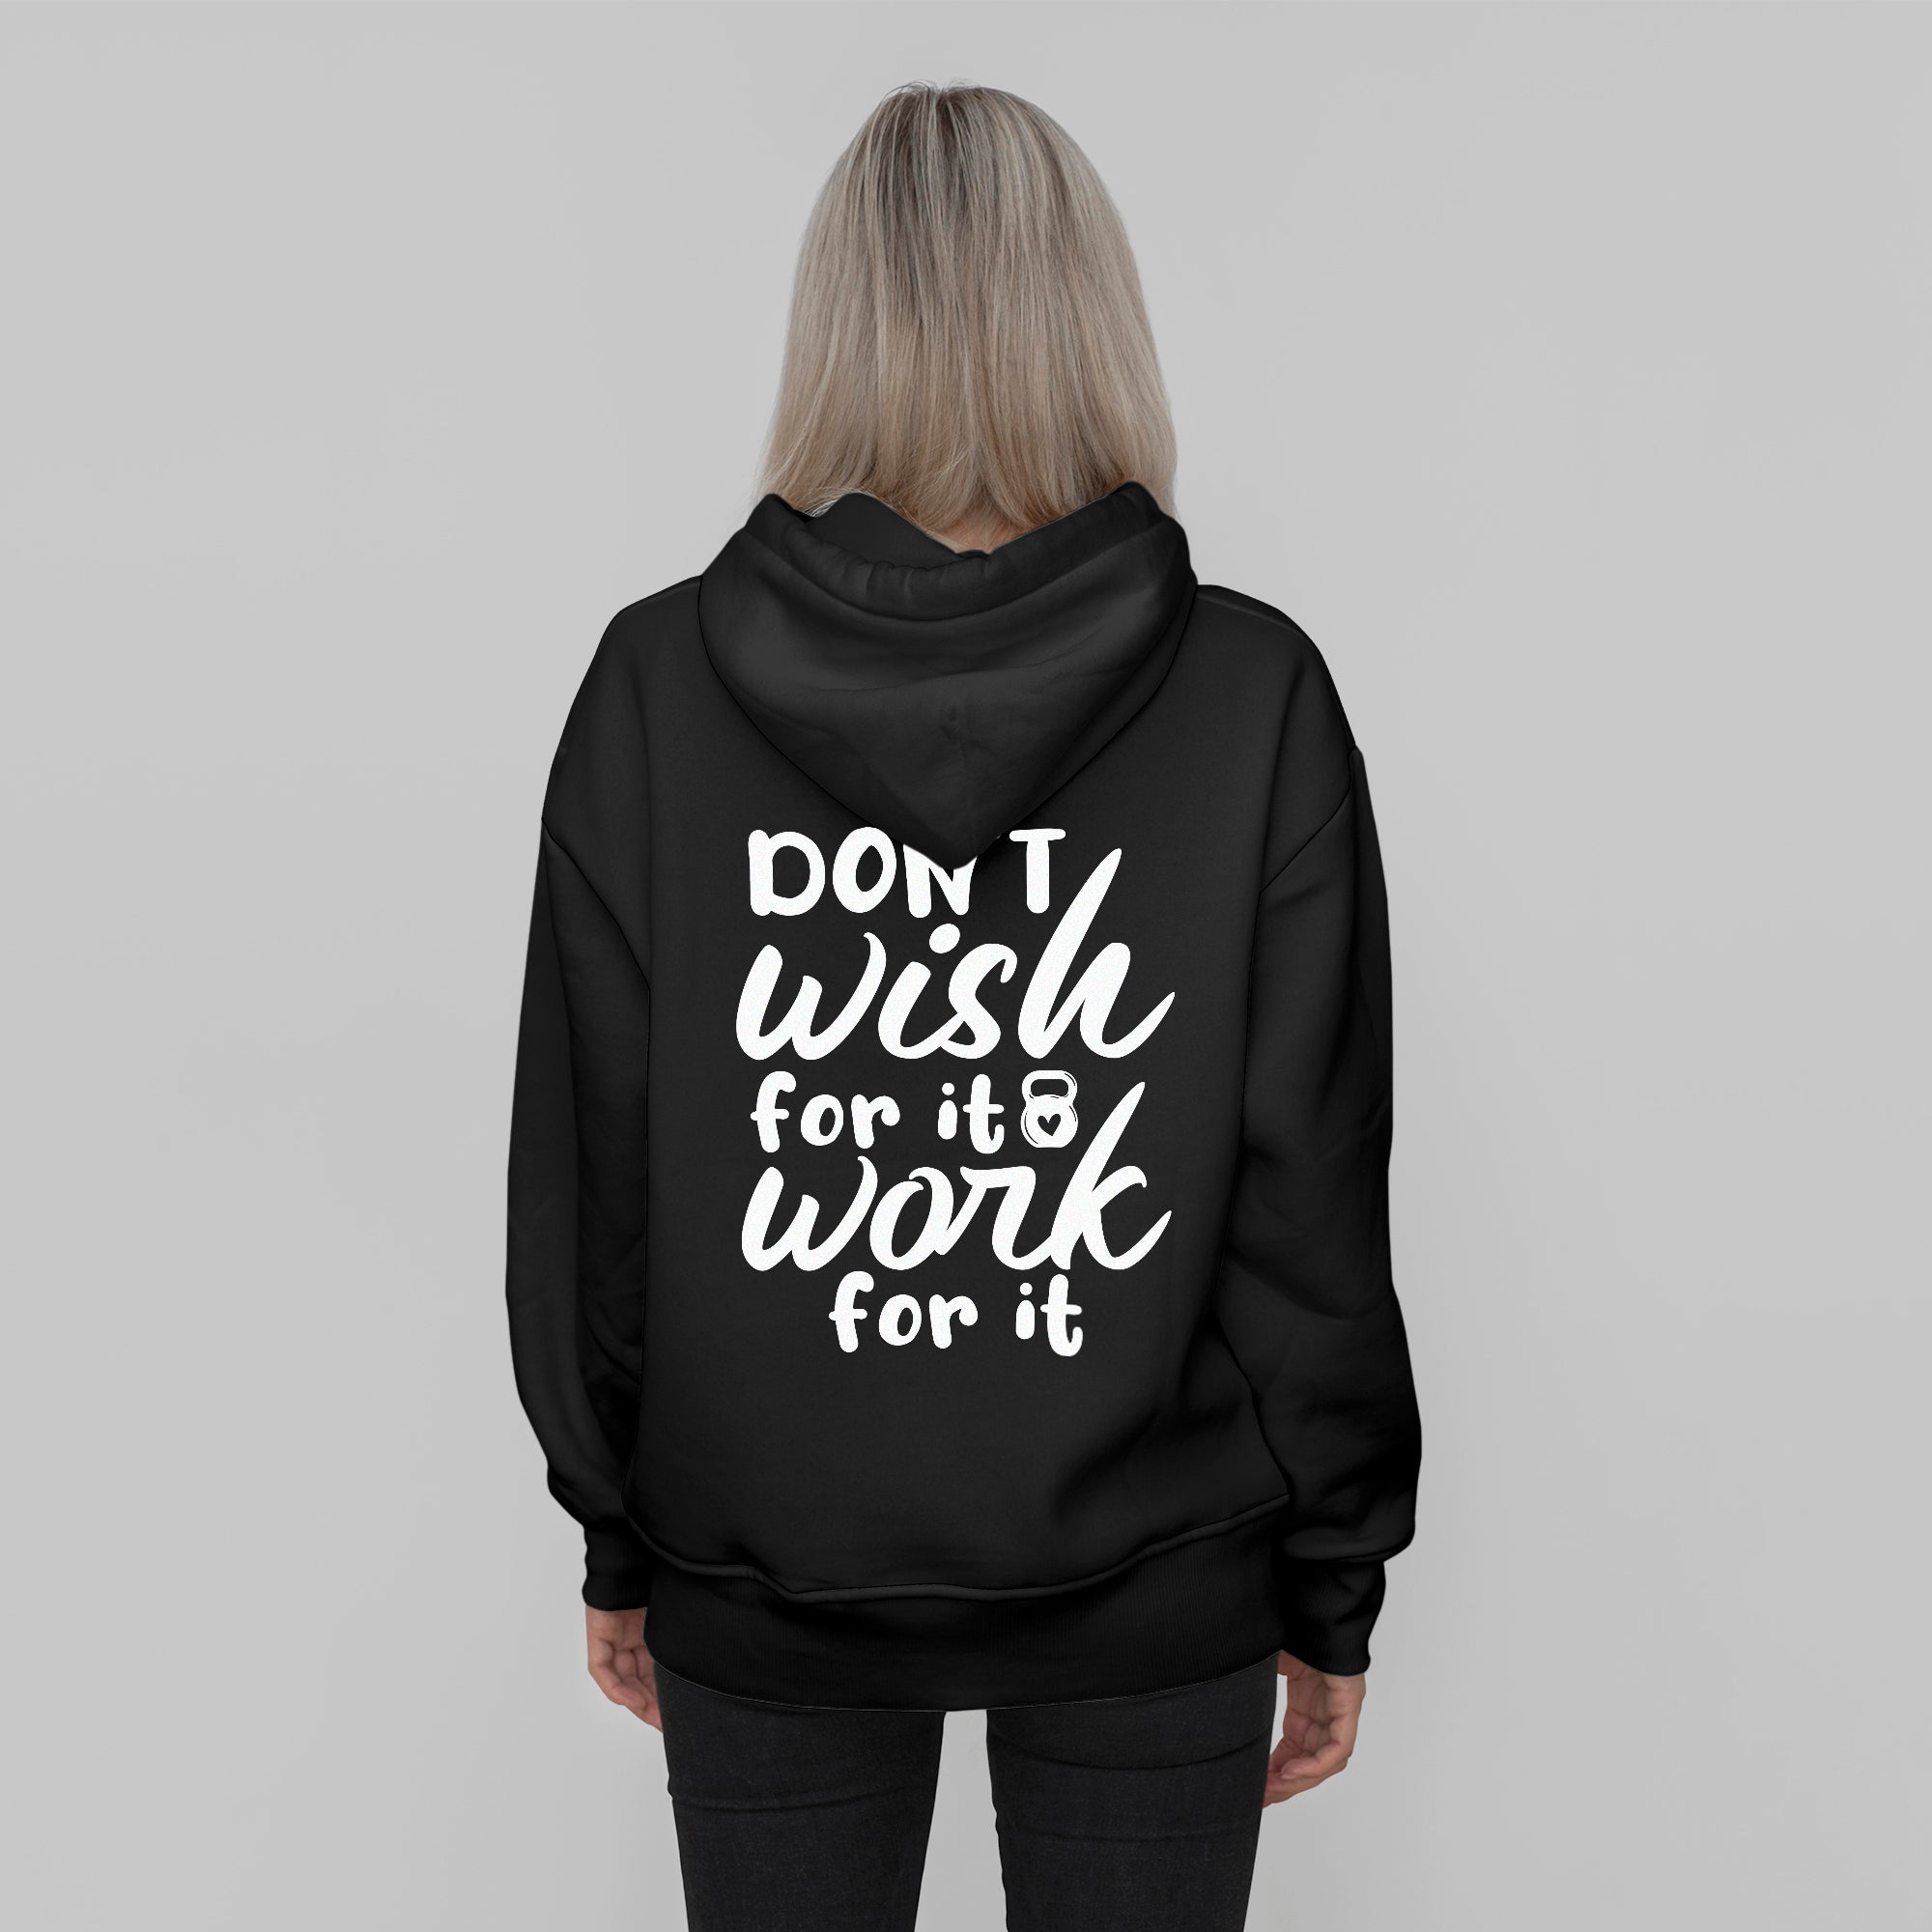 'Don't Wish for it Work for it' Hoodie